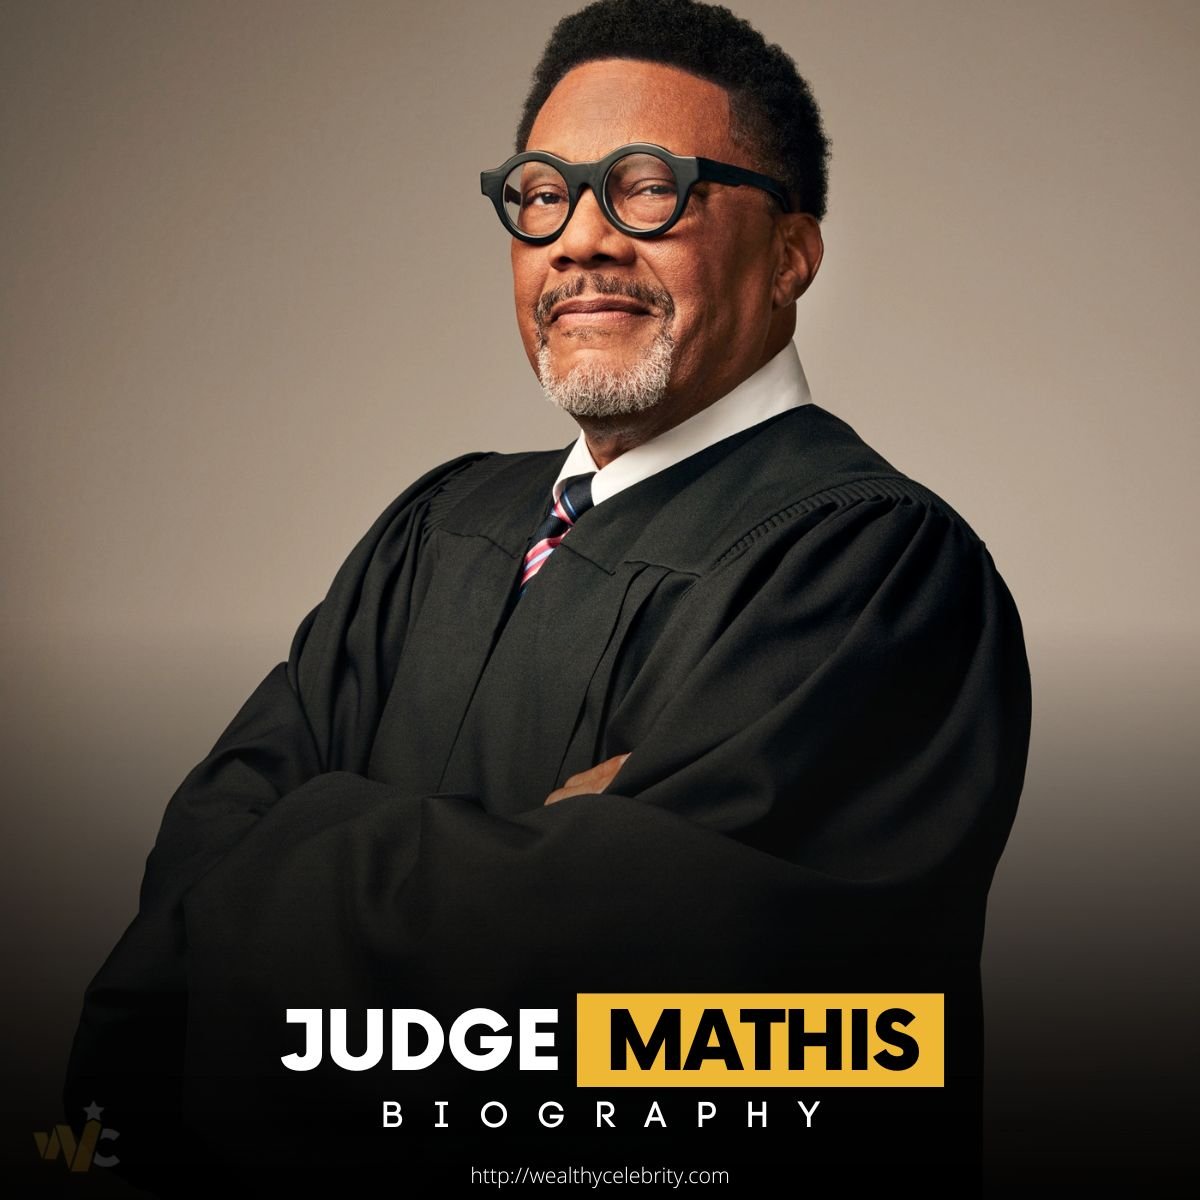 Judge Mathis Net Worth is Whooping $20 Million